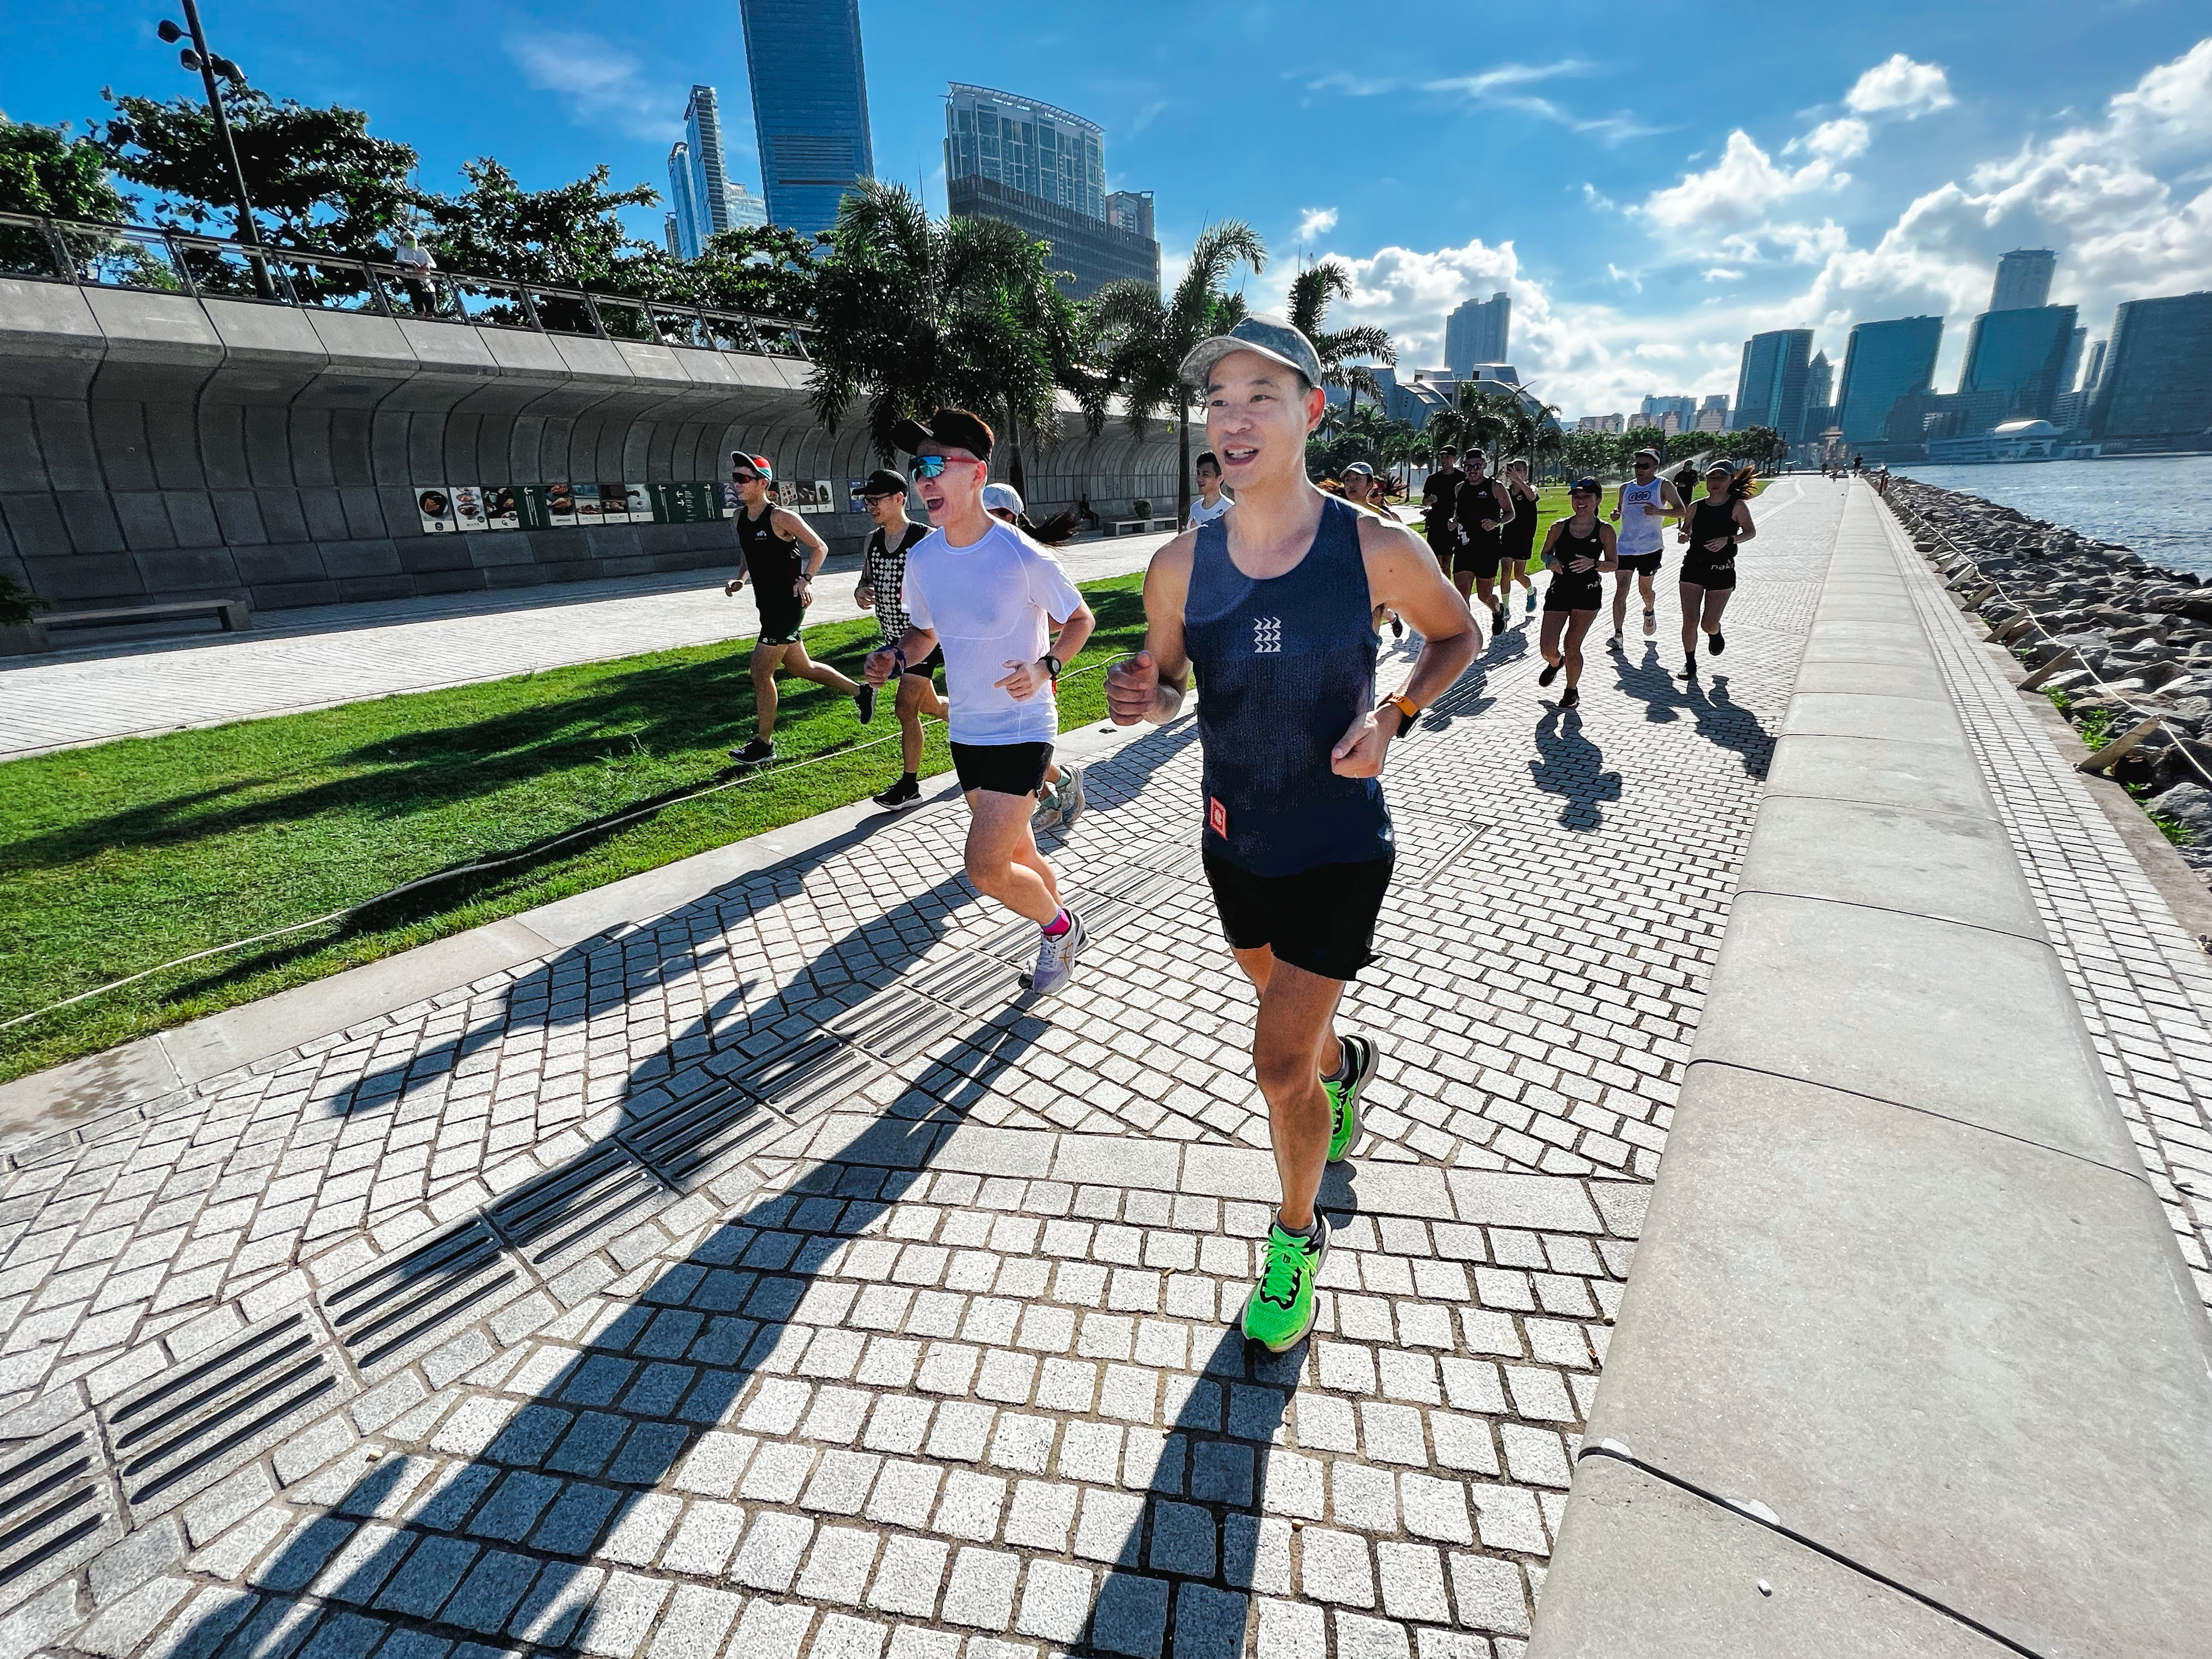 Wazup Running Club founder Andrew Wong (right) leads one of the club’s runs along the Hong Kong waterfront. Photo: Handout